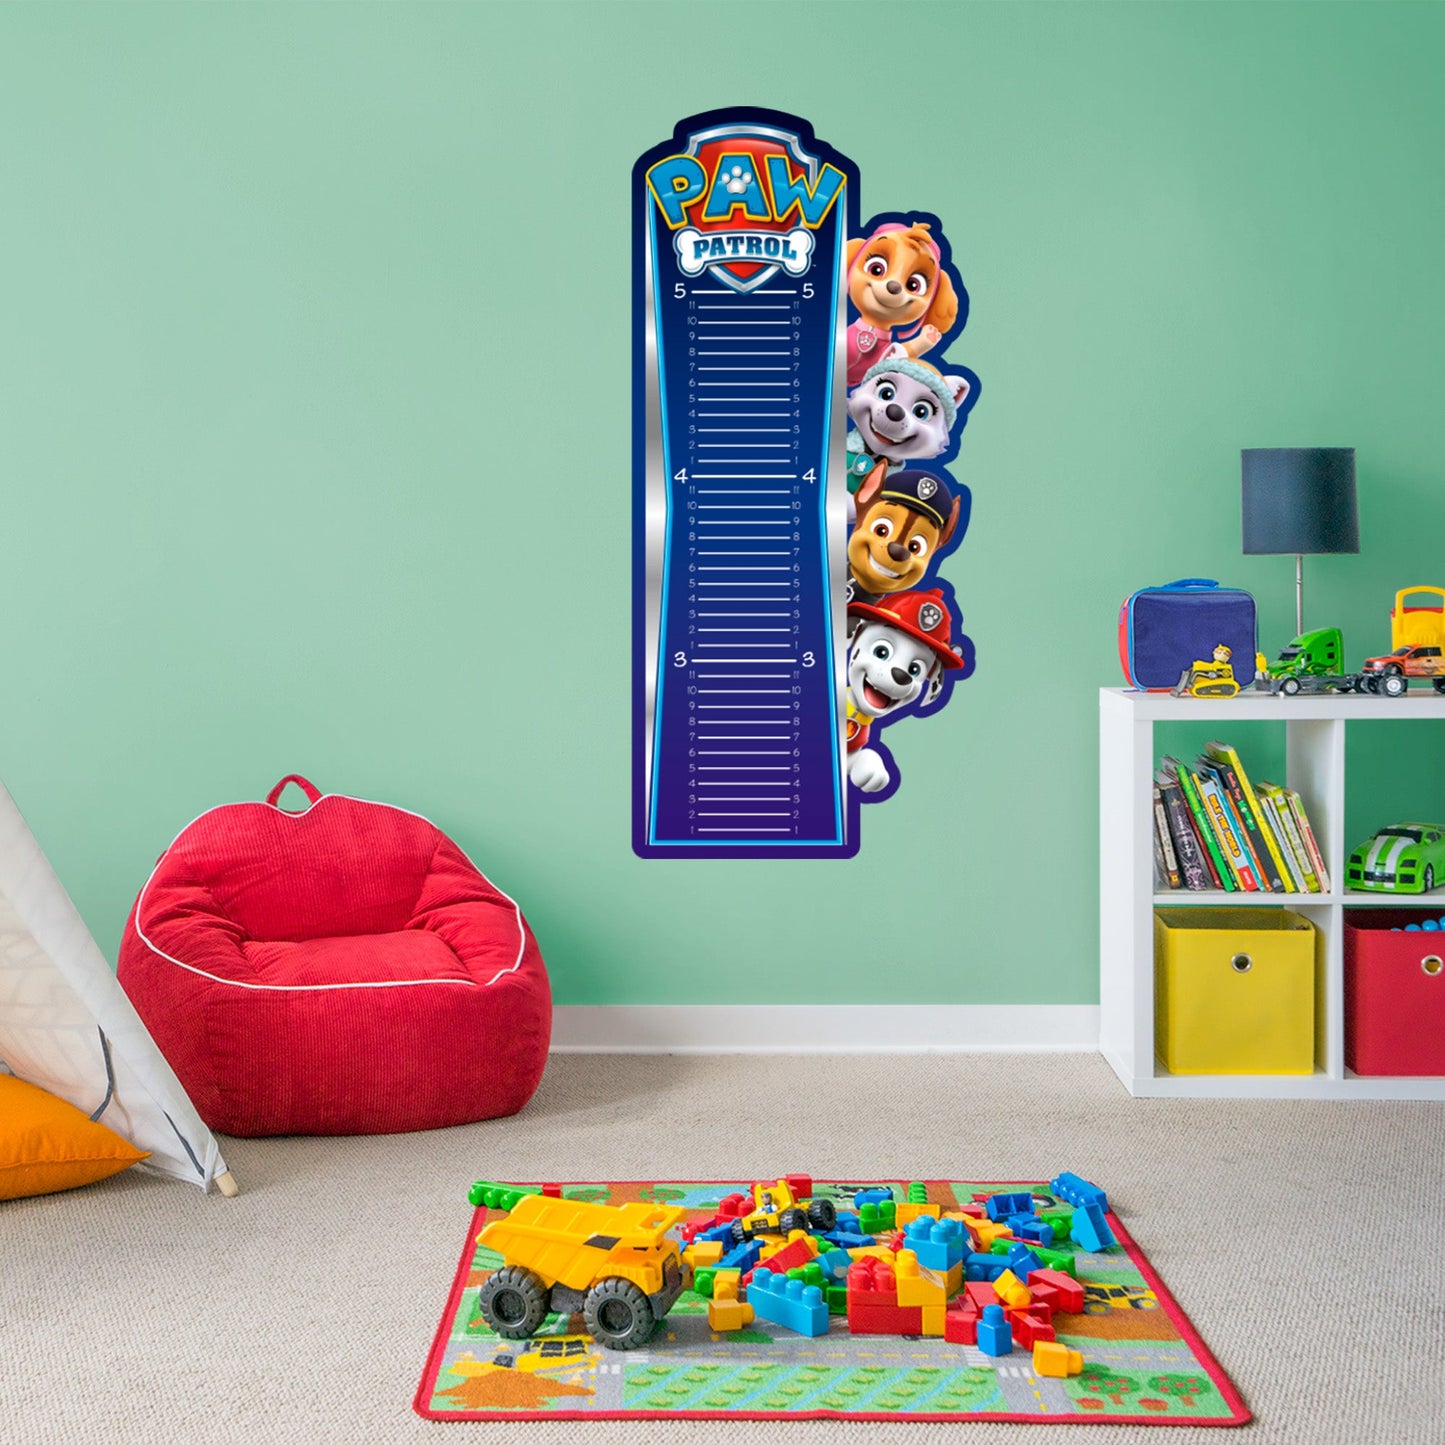 Paw Patrol: Group Growth Chart - Officially Licensed Nickelodeon Removable Adhesive Decal